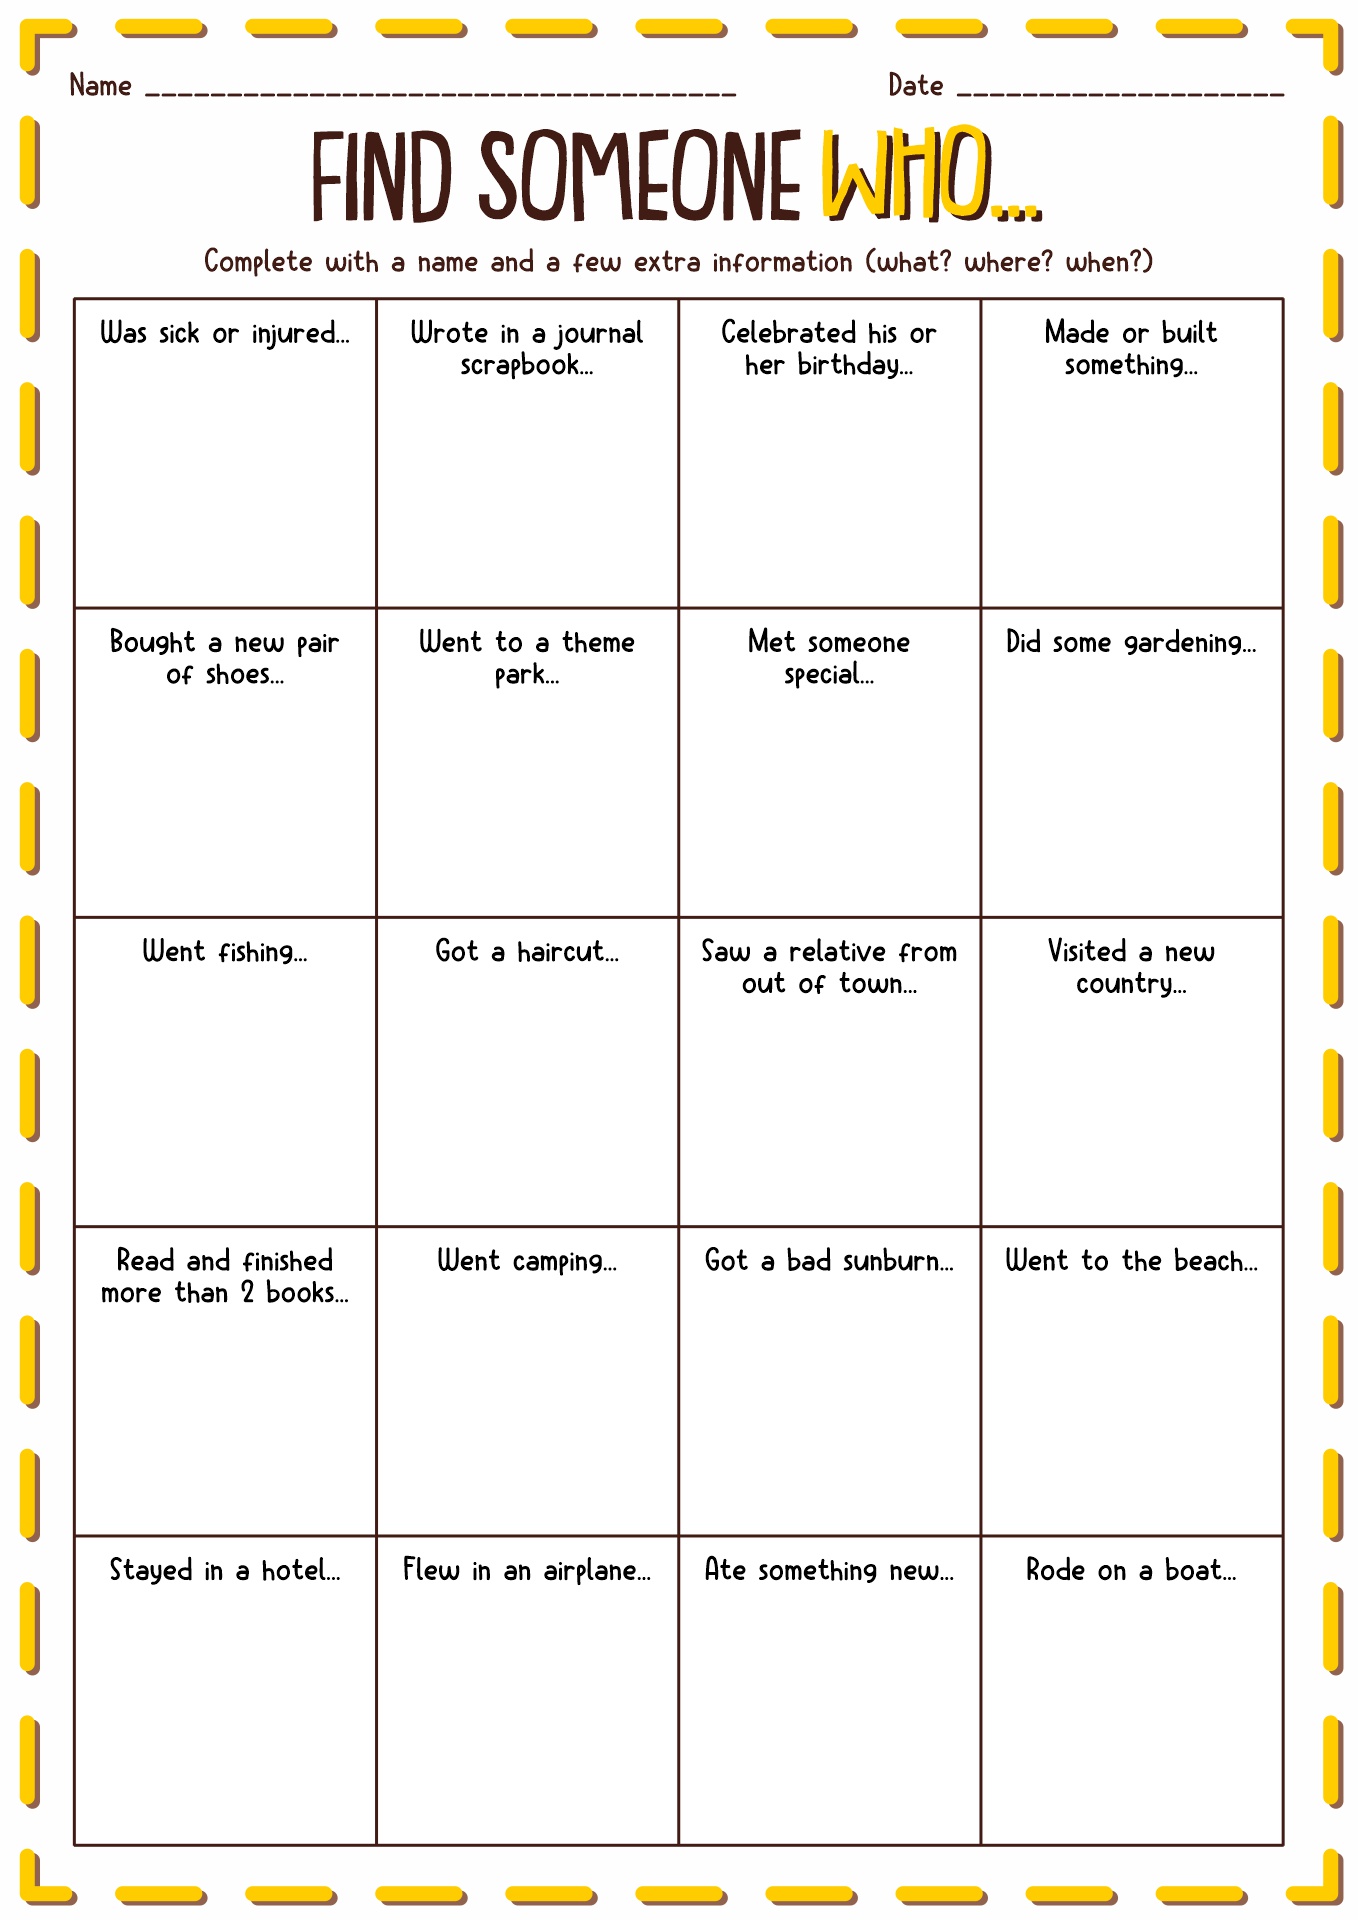 13 Best Images Of Find Someone Who Worksheets Math Activity Find Someone Who Icebreaker Bingo